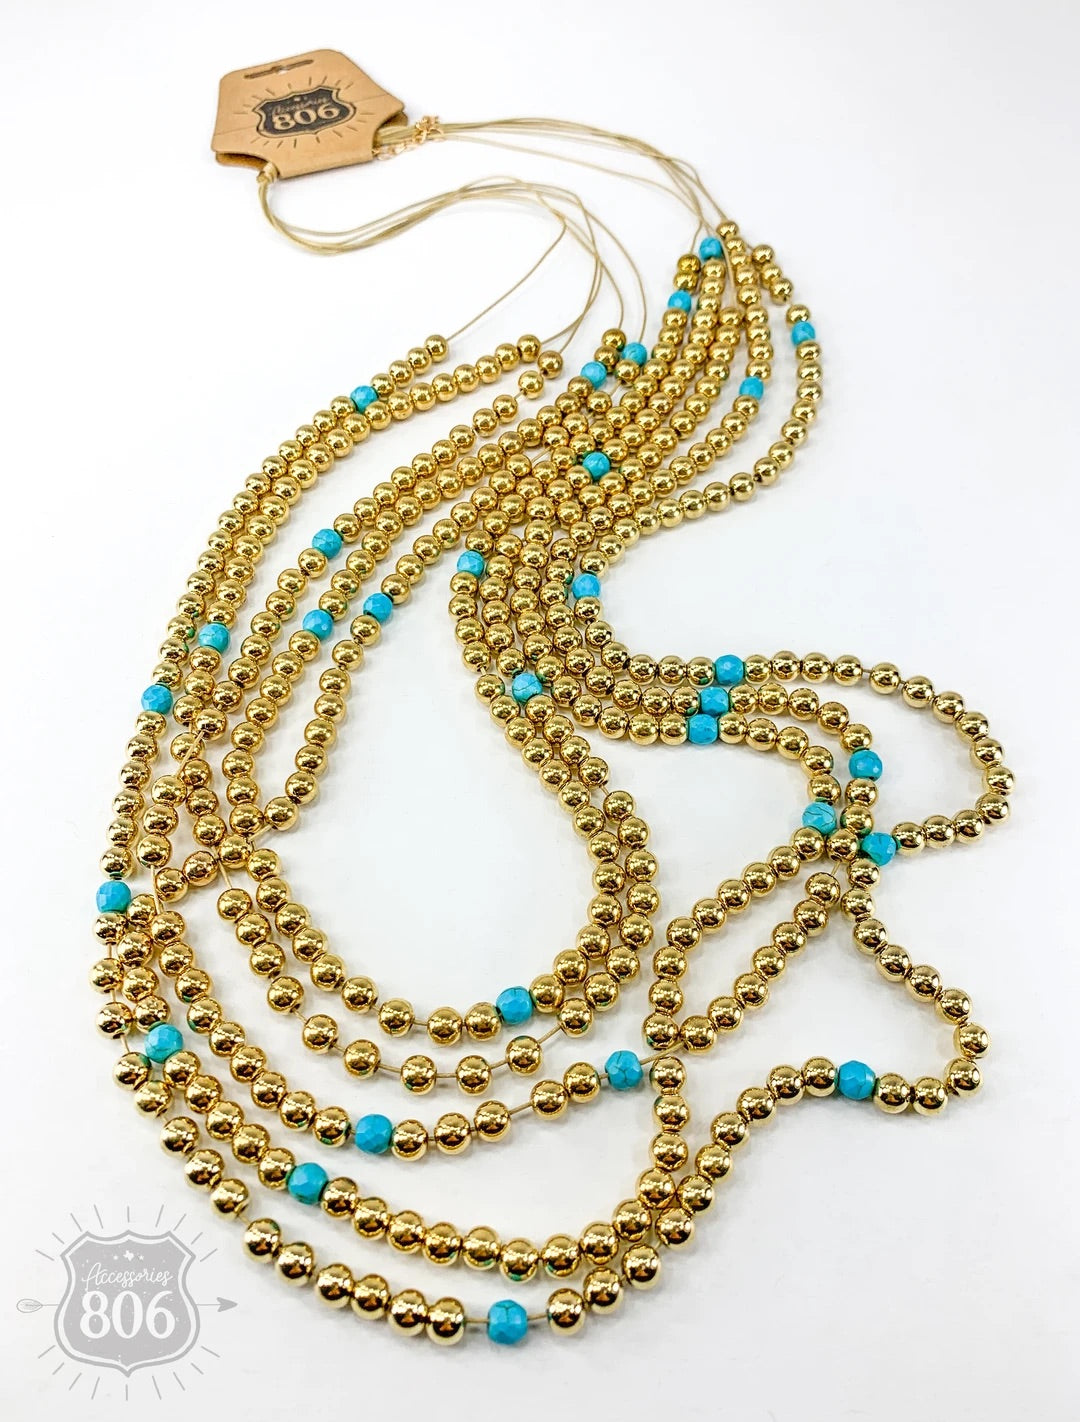 5 strand gold and turquoise necklace